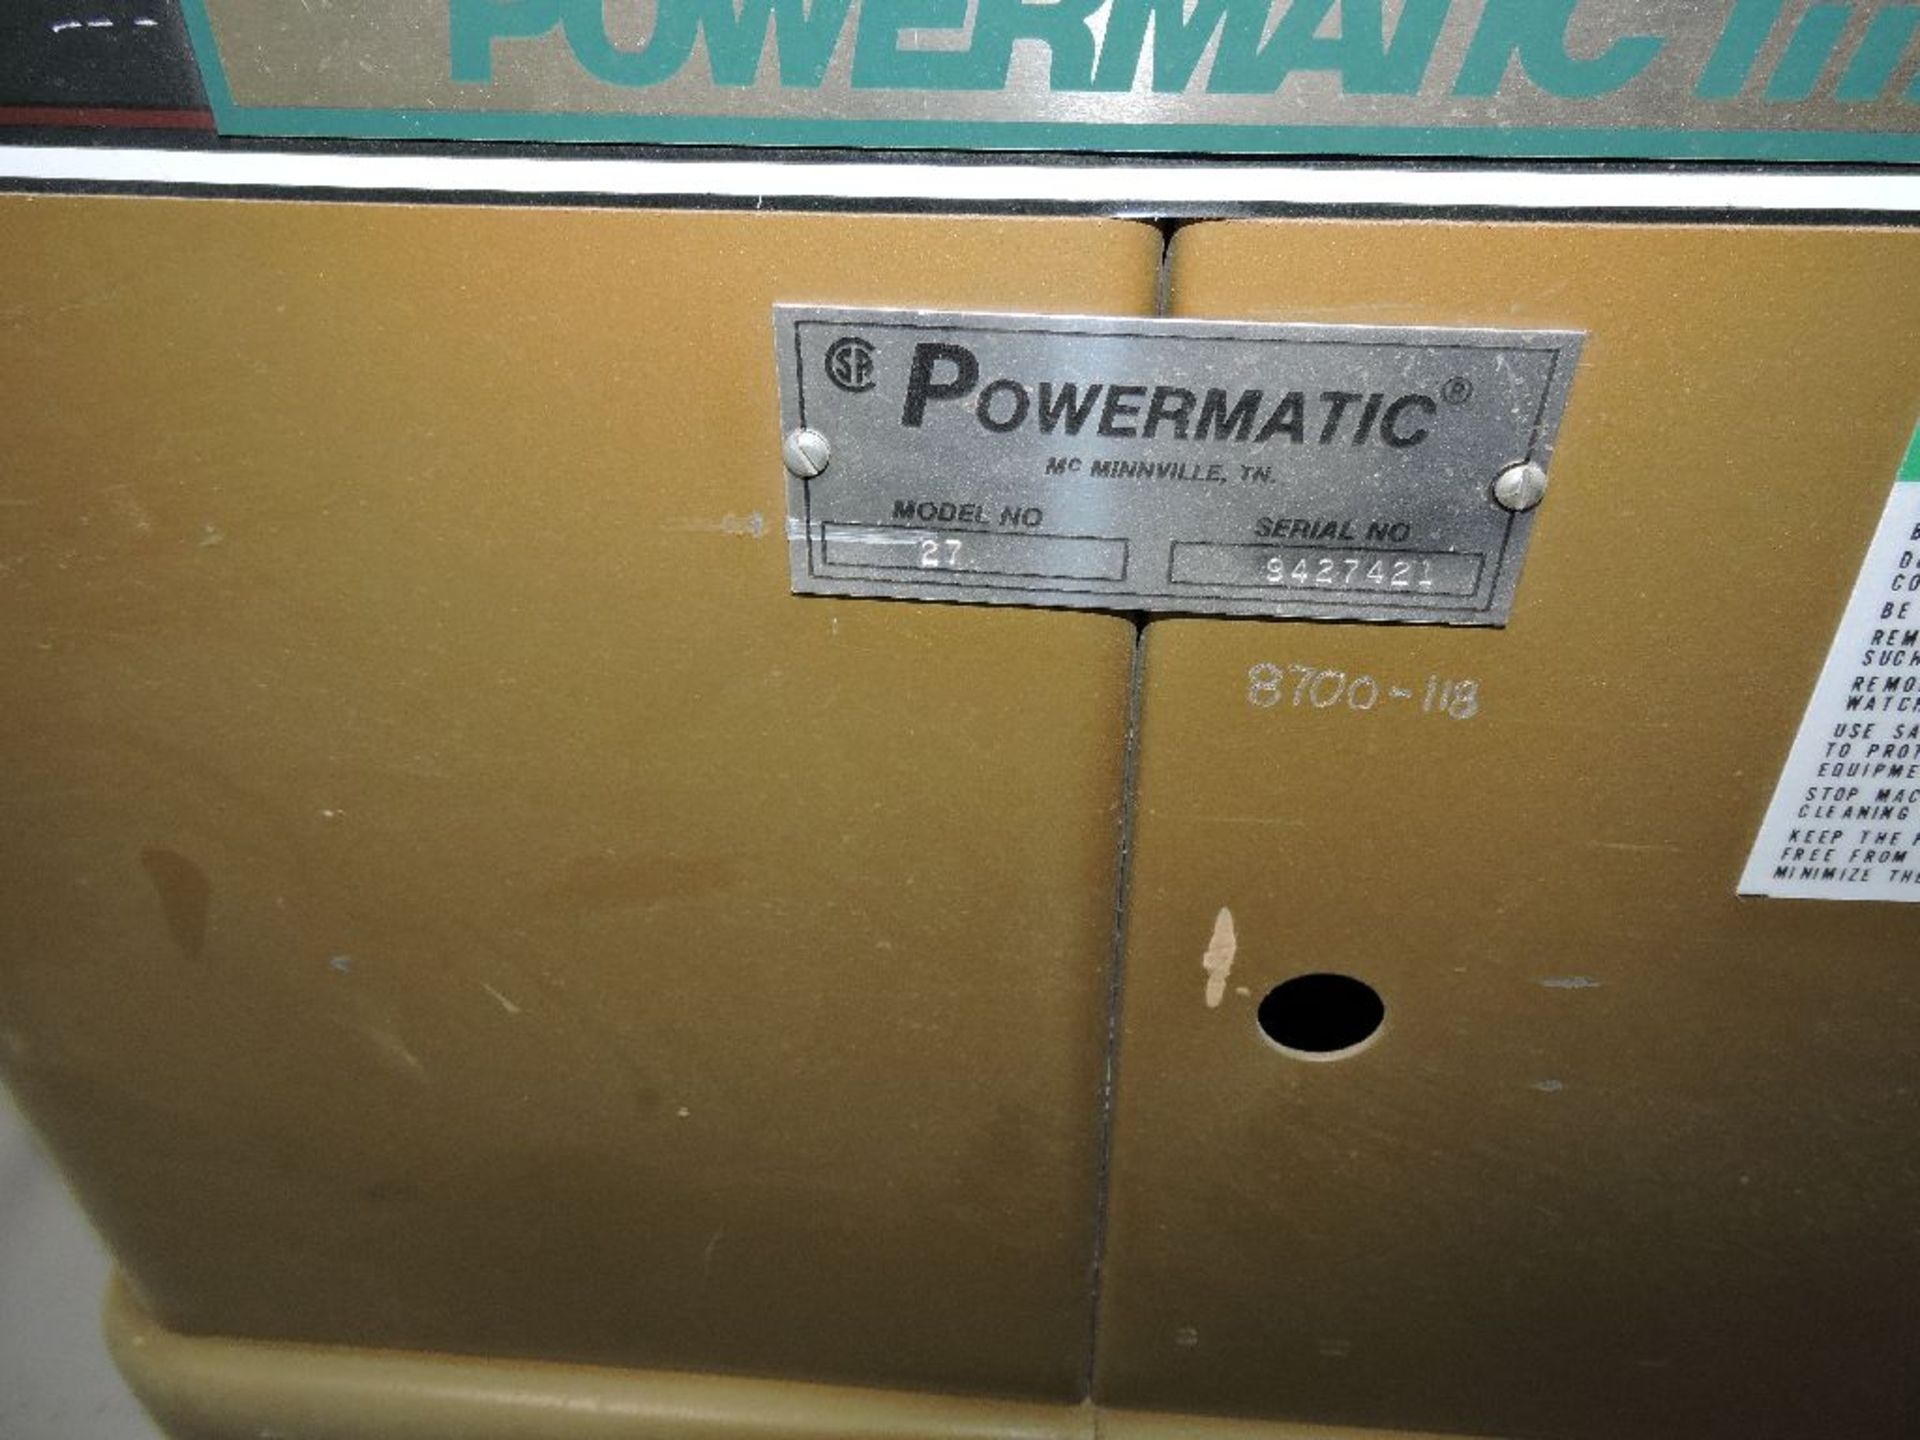 Powermatic shaper, model 27, sn 9427421, w/extra cutting heads, voltage 230/460. - Image 7 of 7